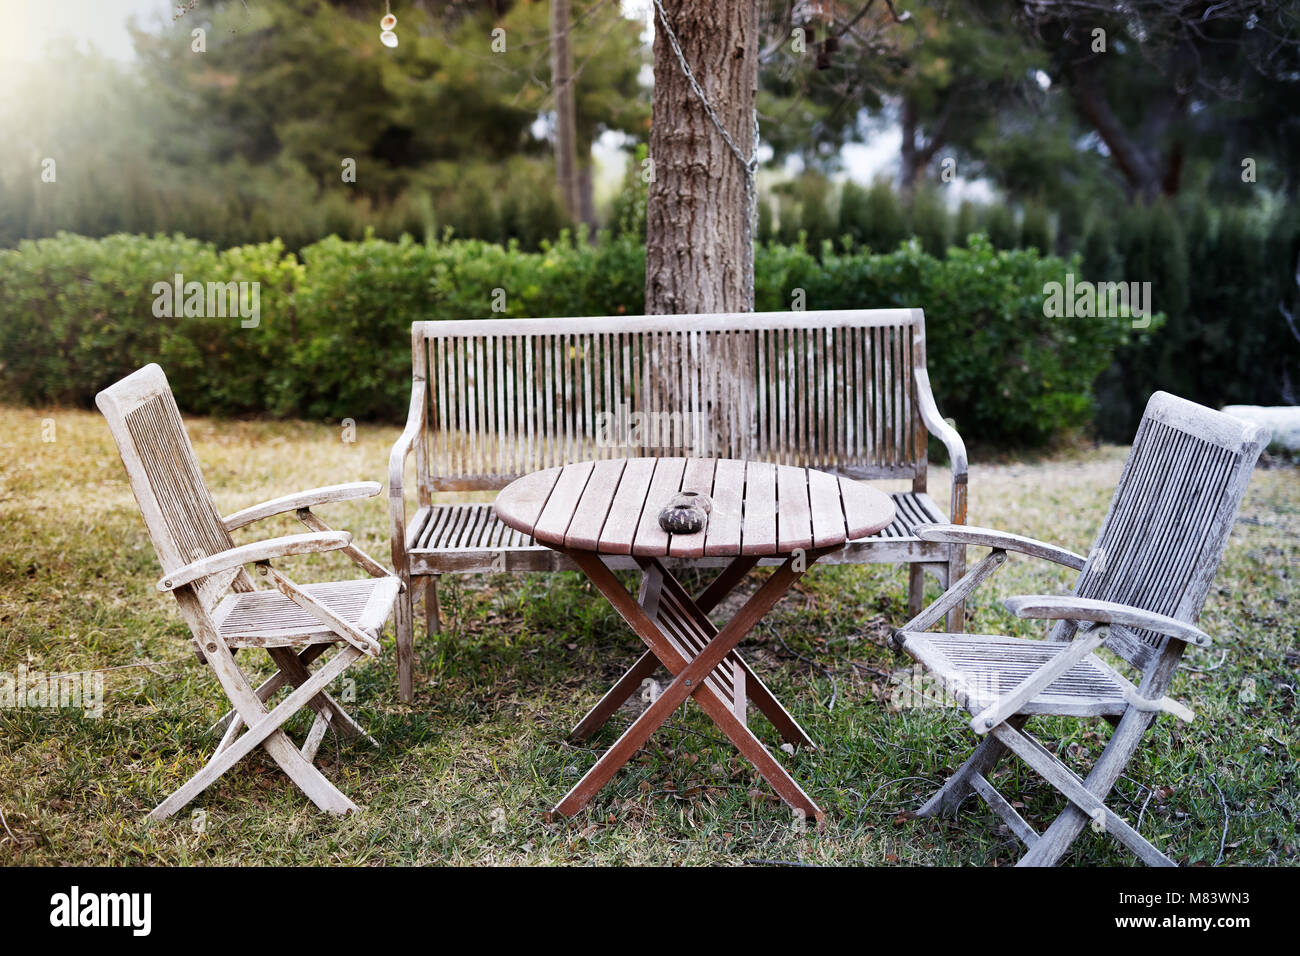 old wooden table in the garden Stock Photo